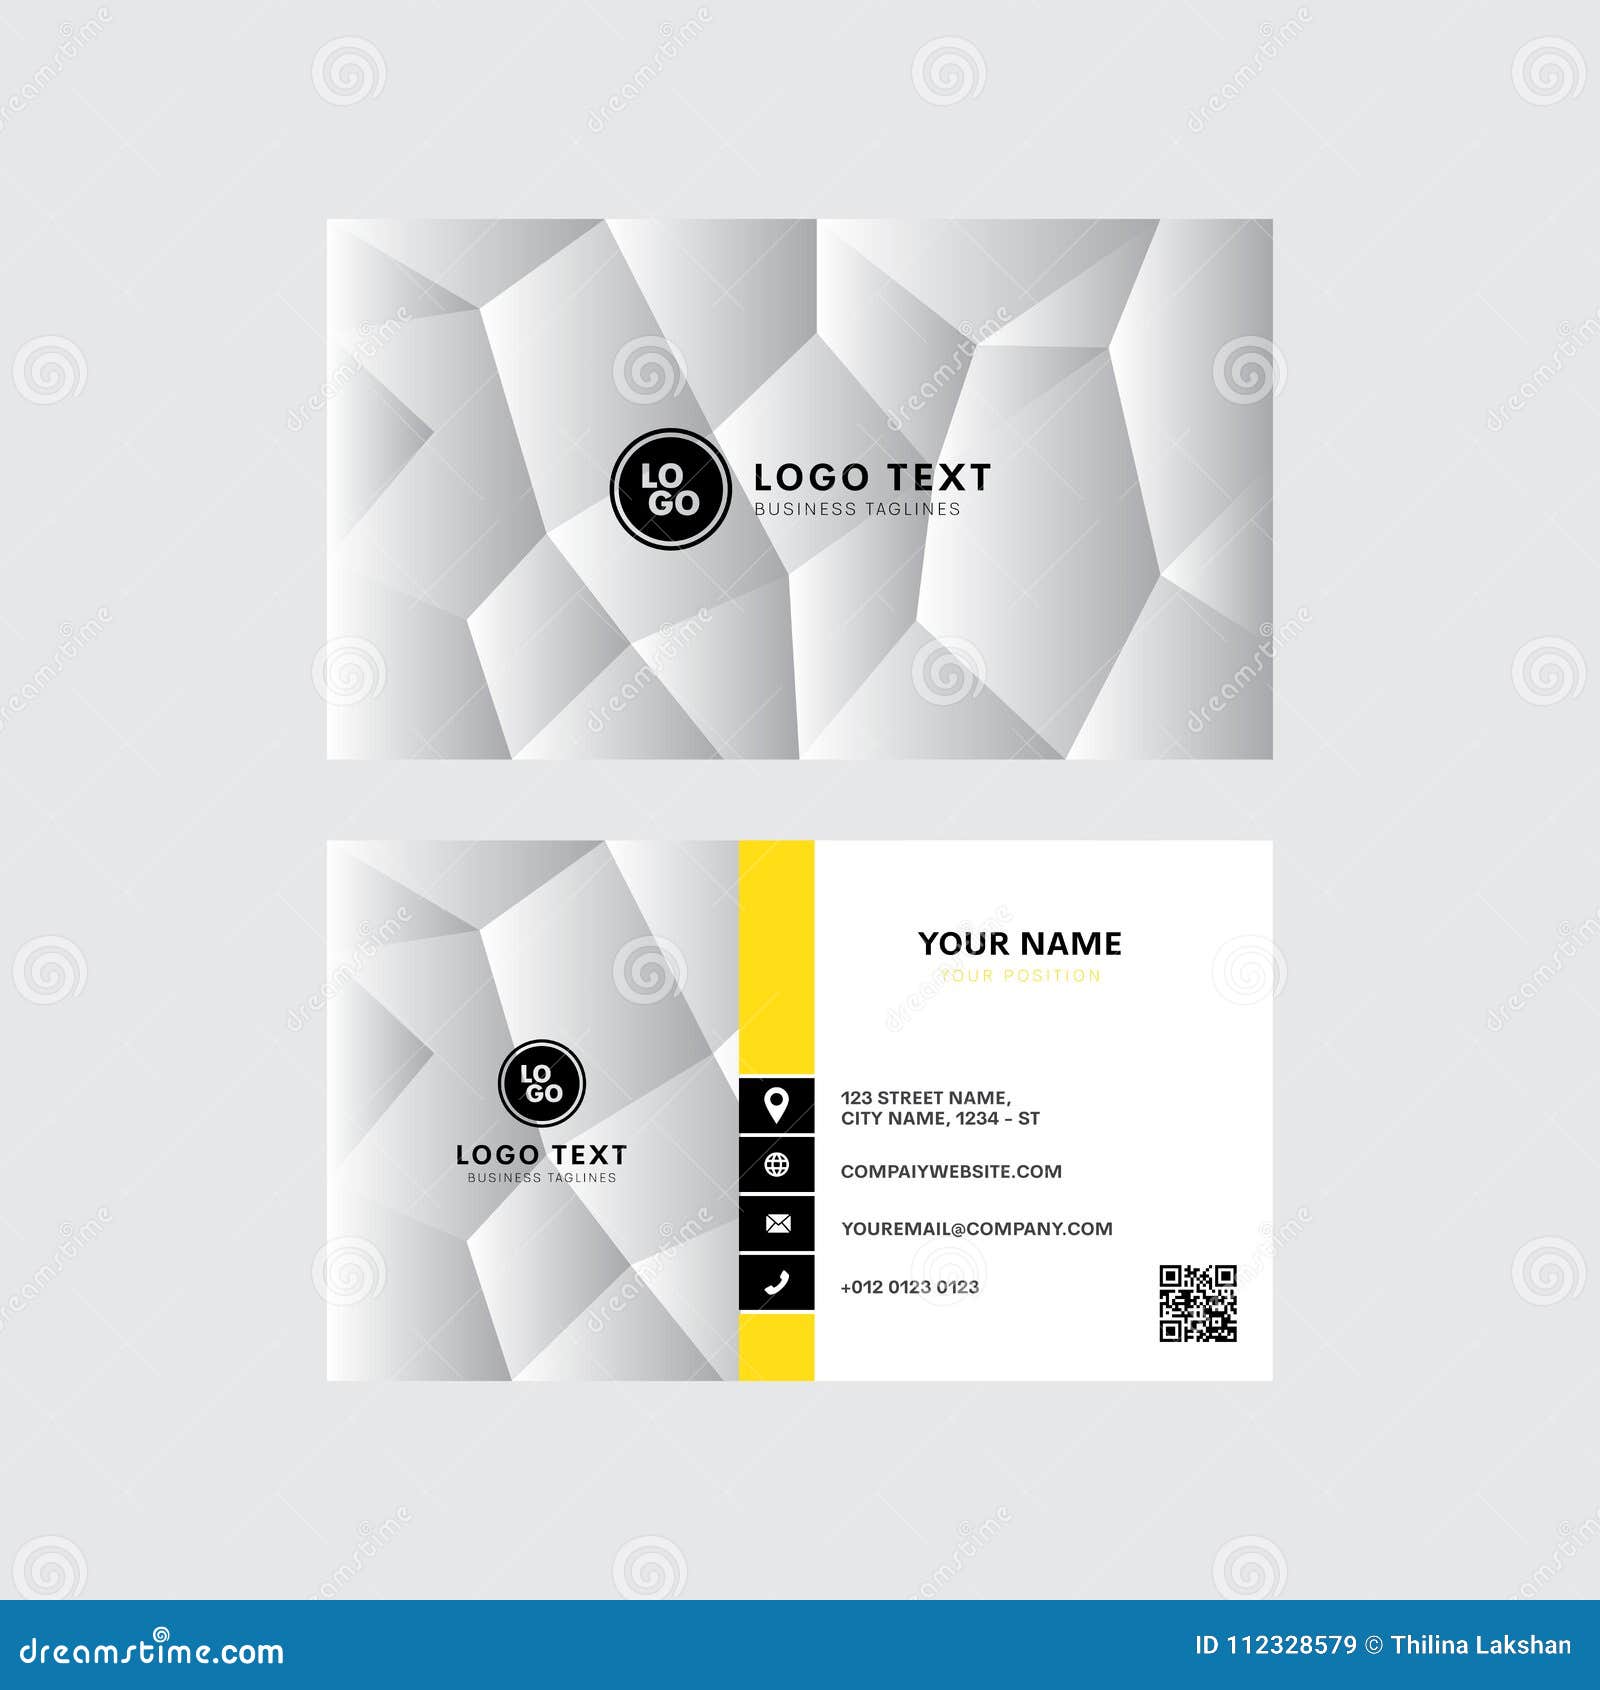 Professional Business Card Vector Design, Invitation Card Template Within Professional Business Card Templates Free Download